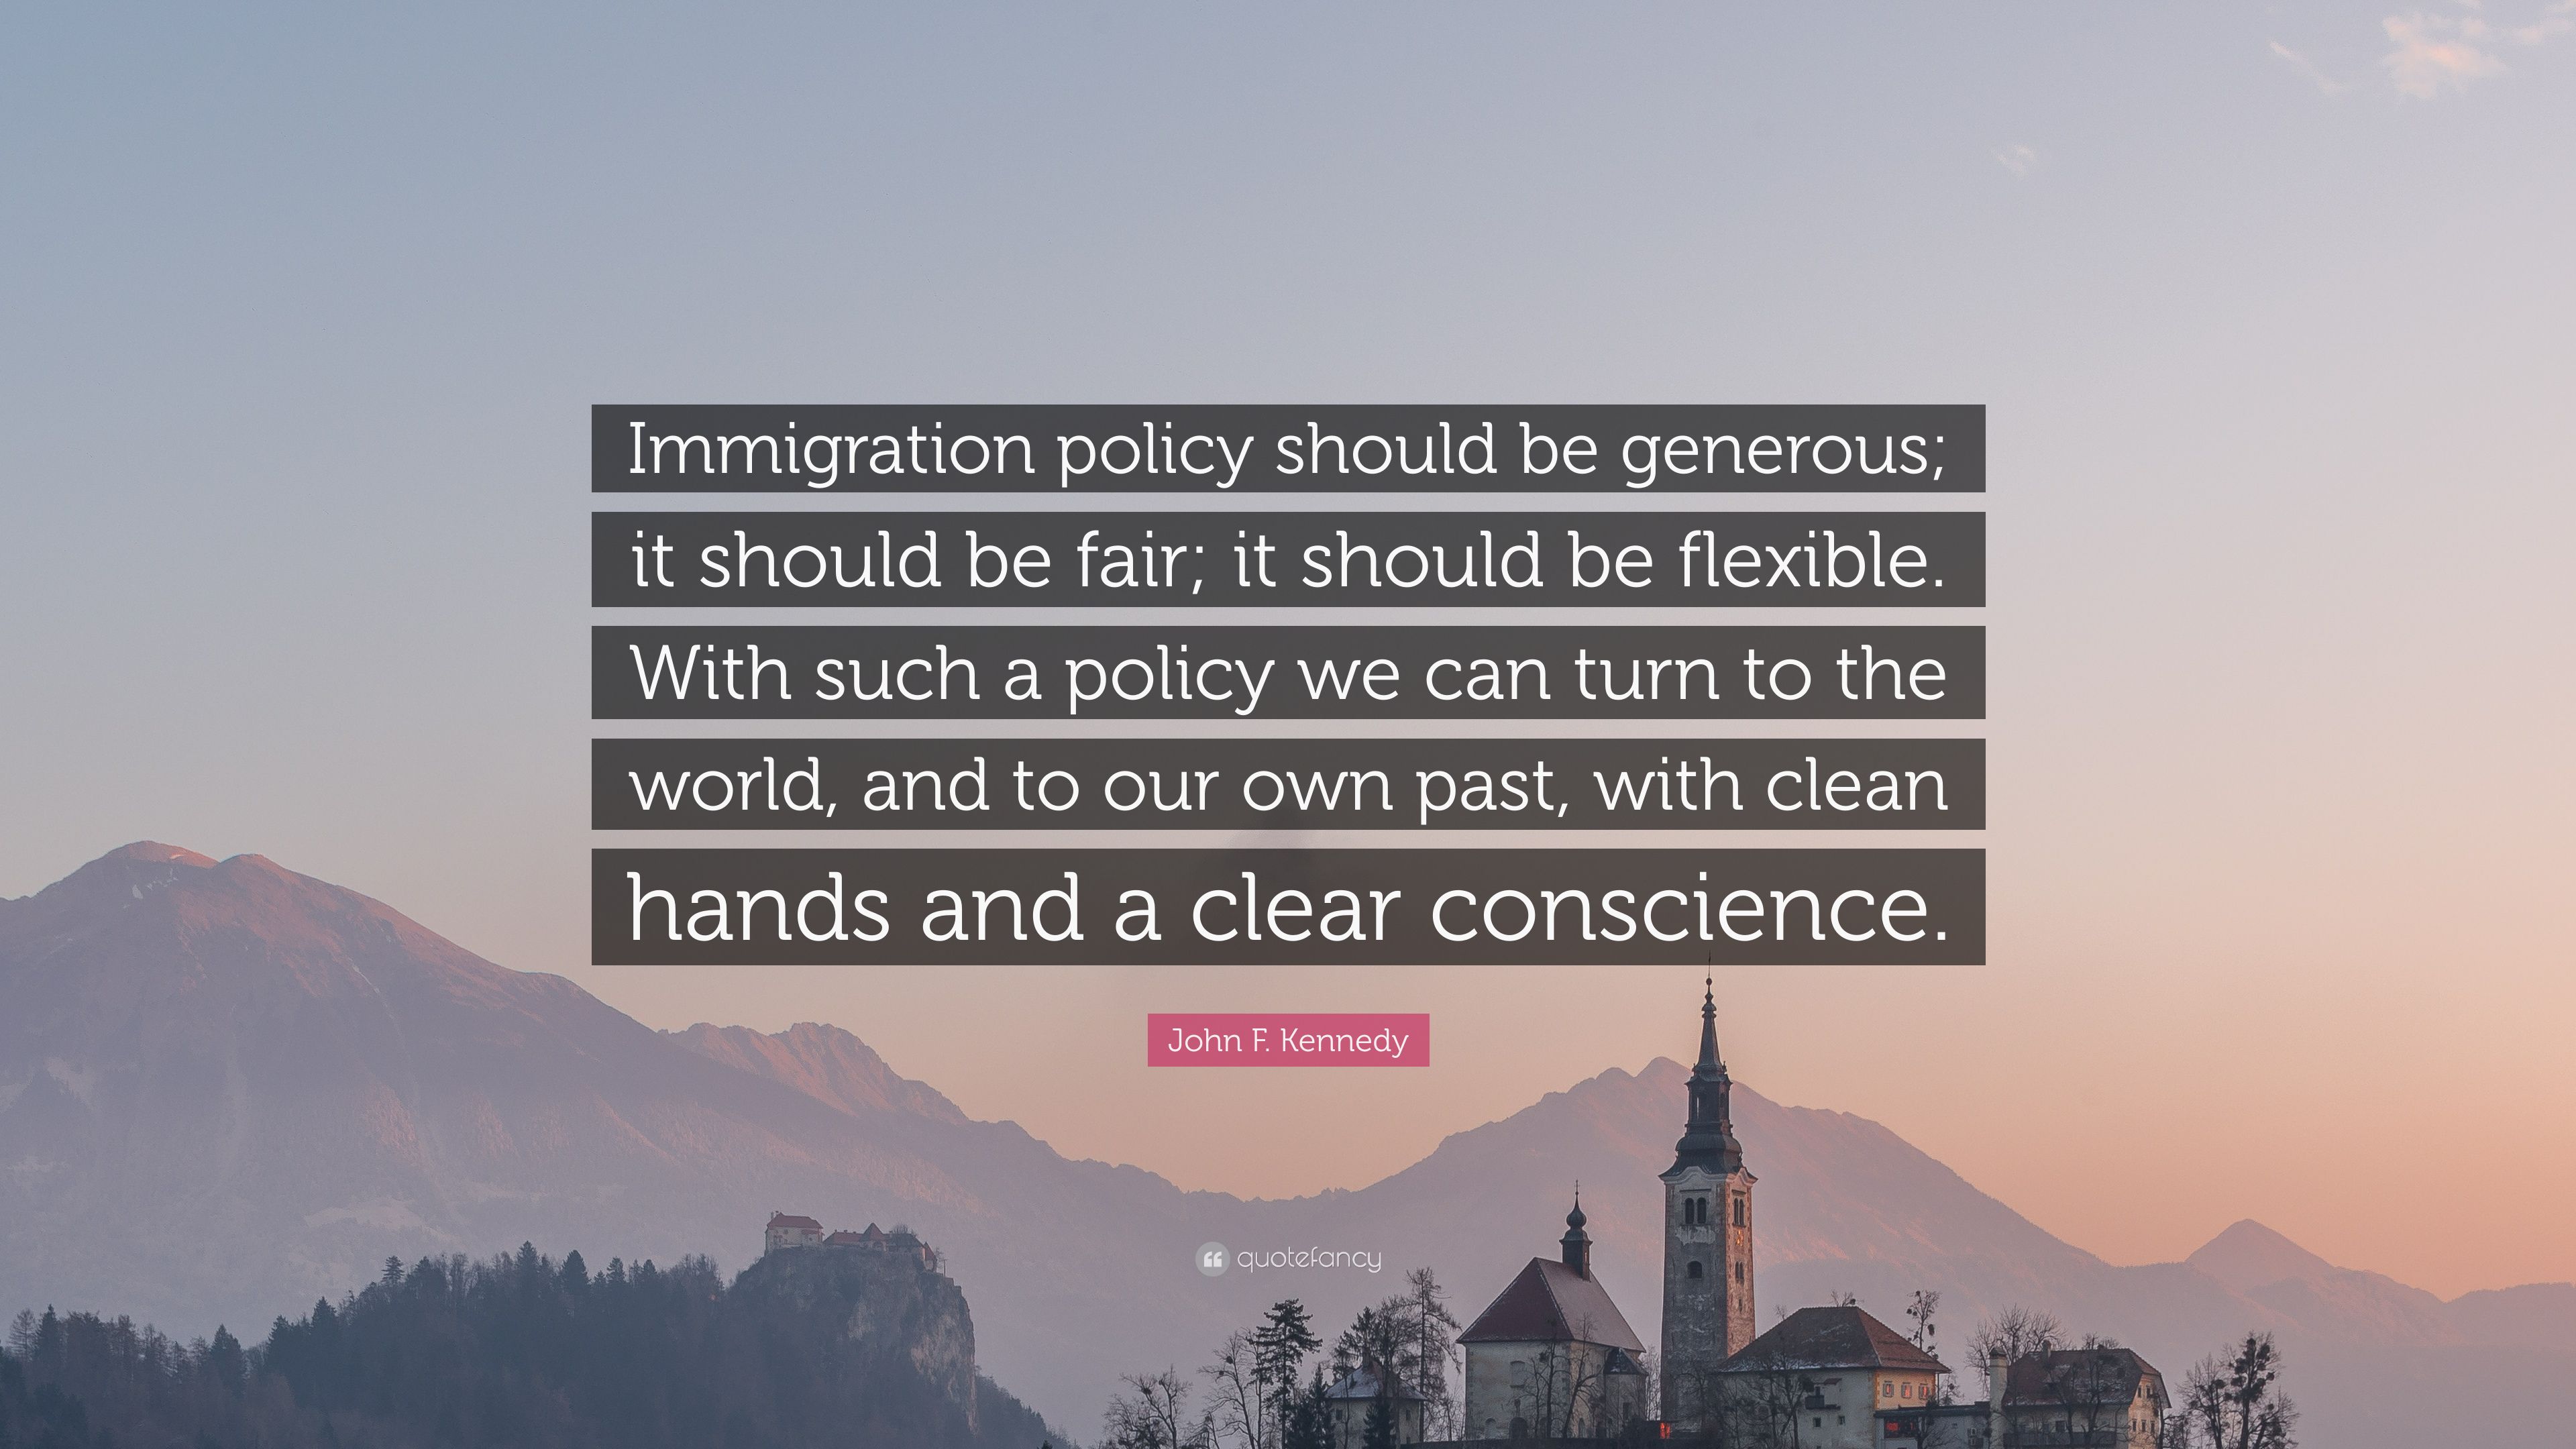 John F. Kennedy Quote: “Immigration policy should be generous; it should be fair; it should be flexible. With such a policy we can turn to the w.” (10 wallpaper)